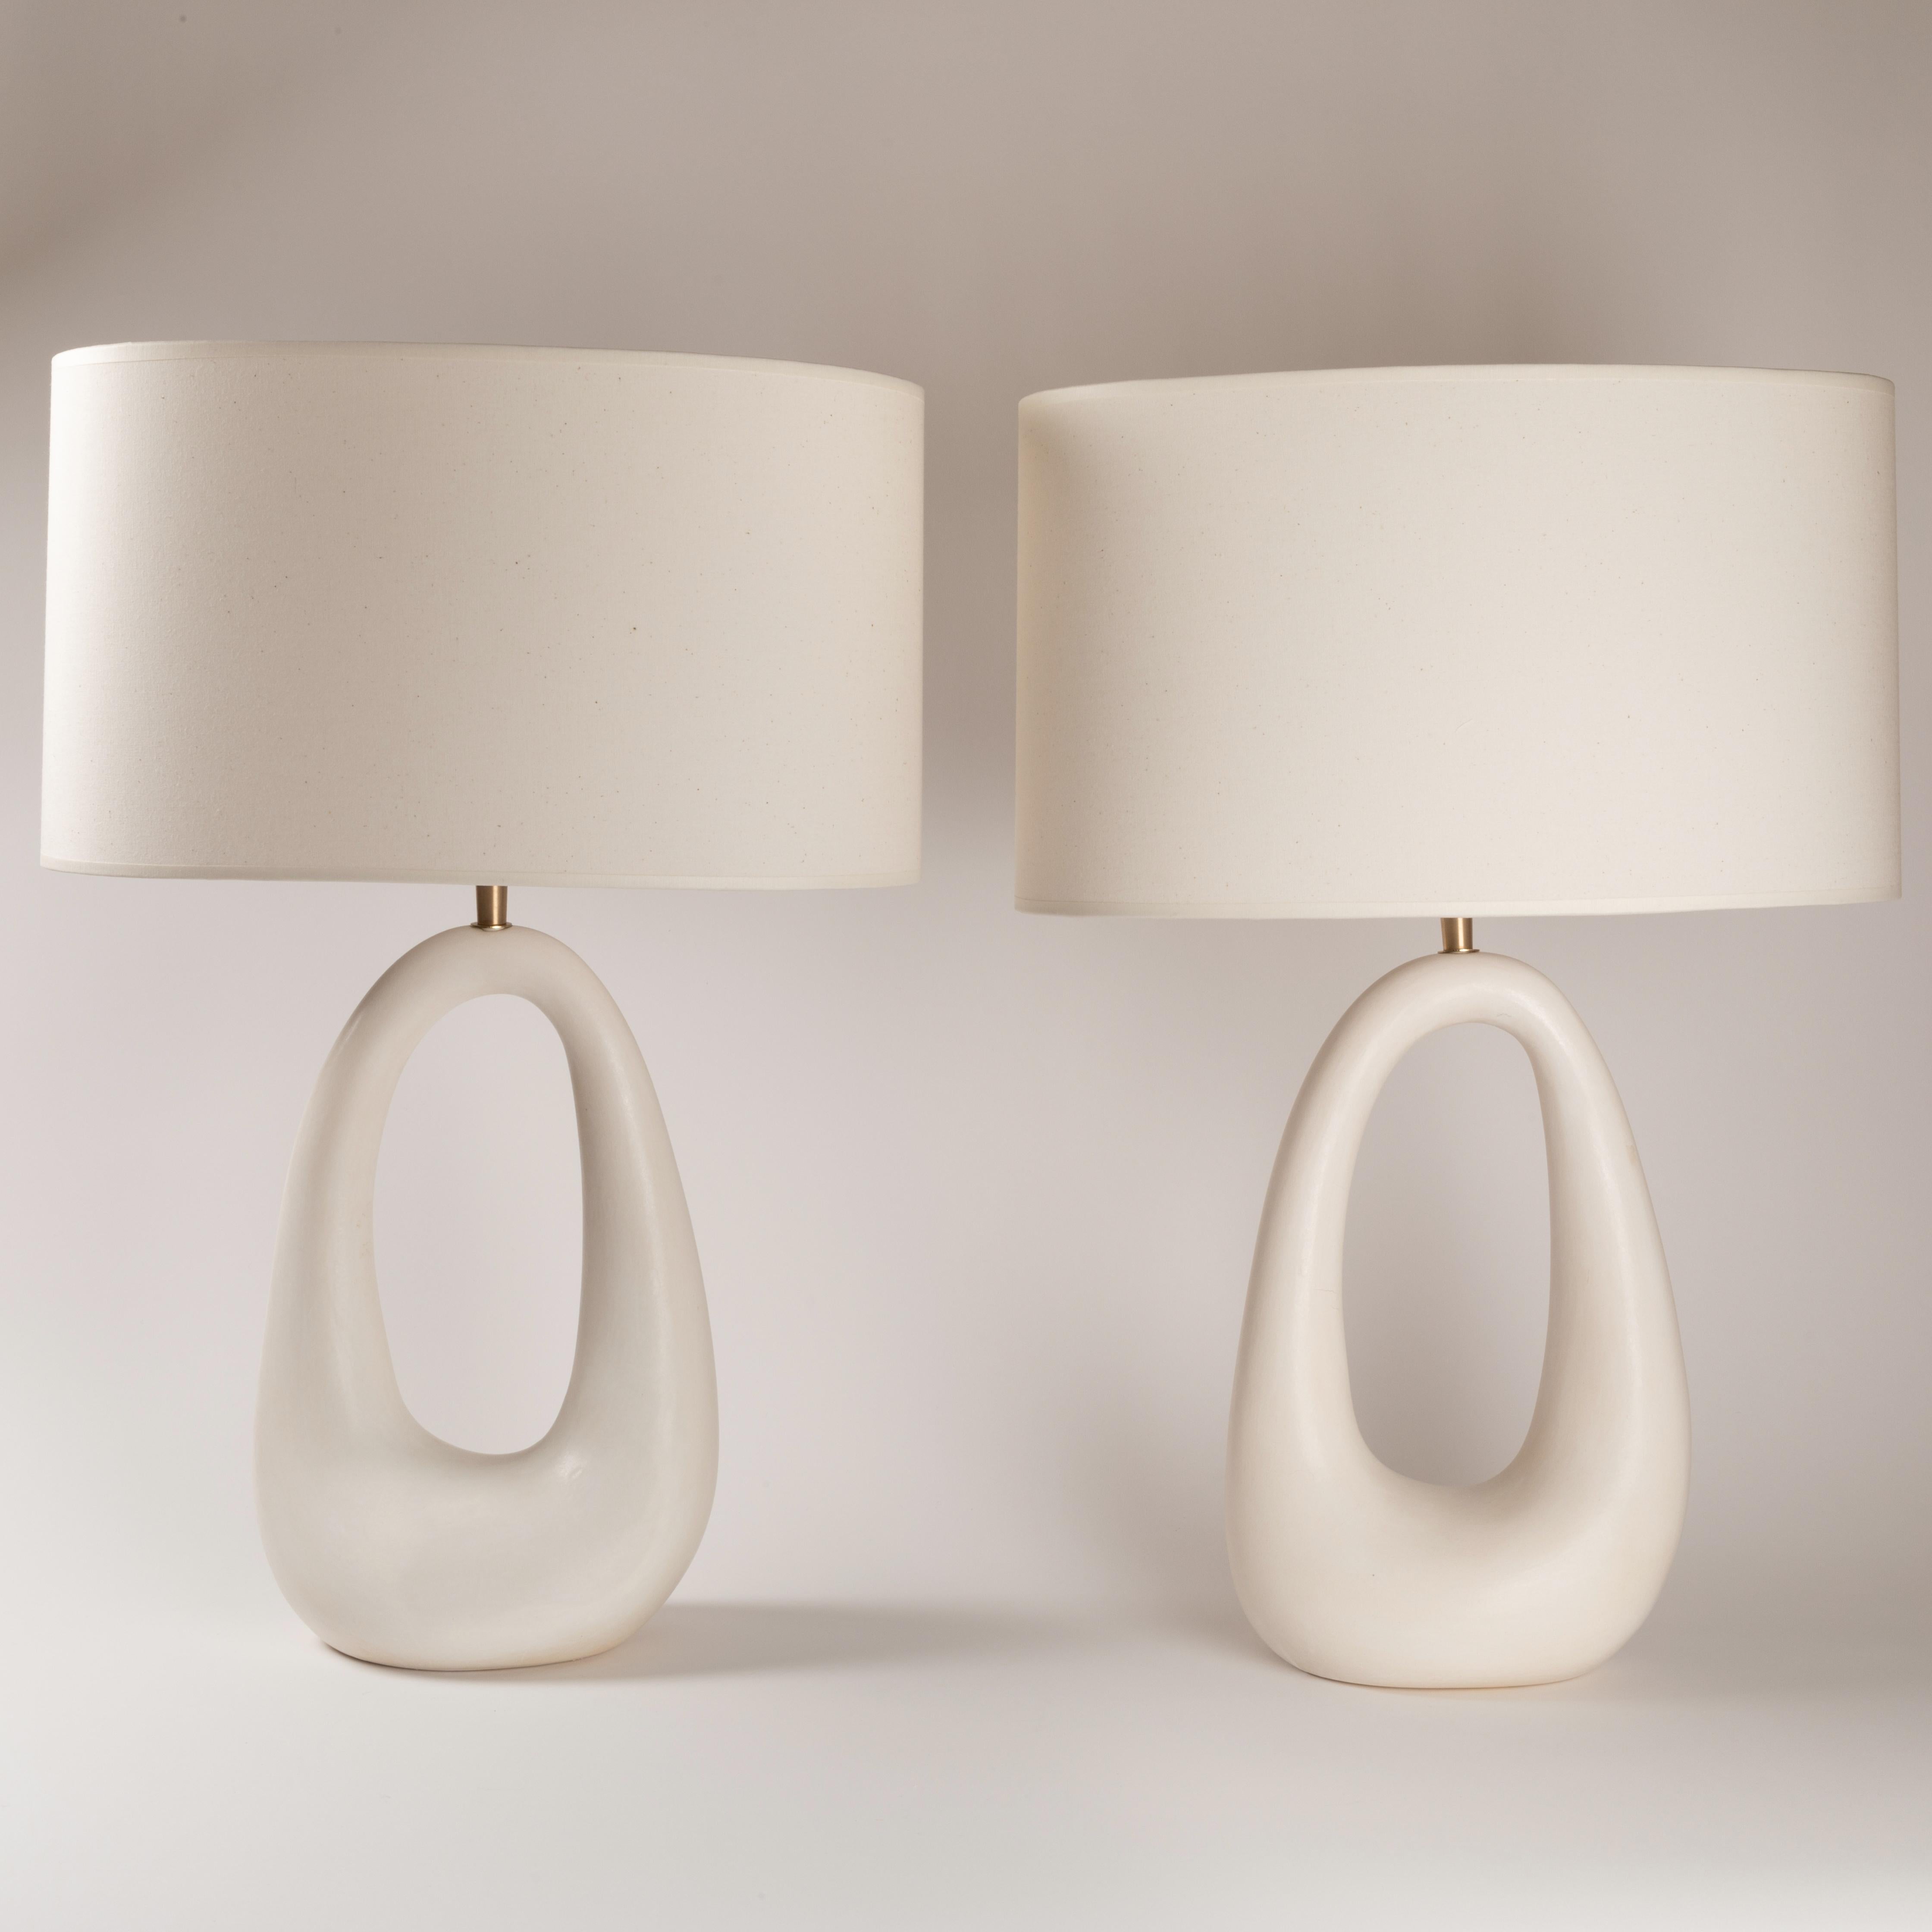 Set of 2 ring table lamps by Elsa Foulon.
Dimensions: D 64 x H 41 cm.
Materials: ceramic, brass, linen.
Unique piece
Also available in different finishes and dimensions.

All our lamps can be wired according to each country. If sold to the USA